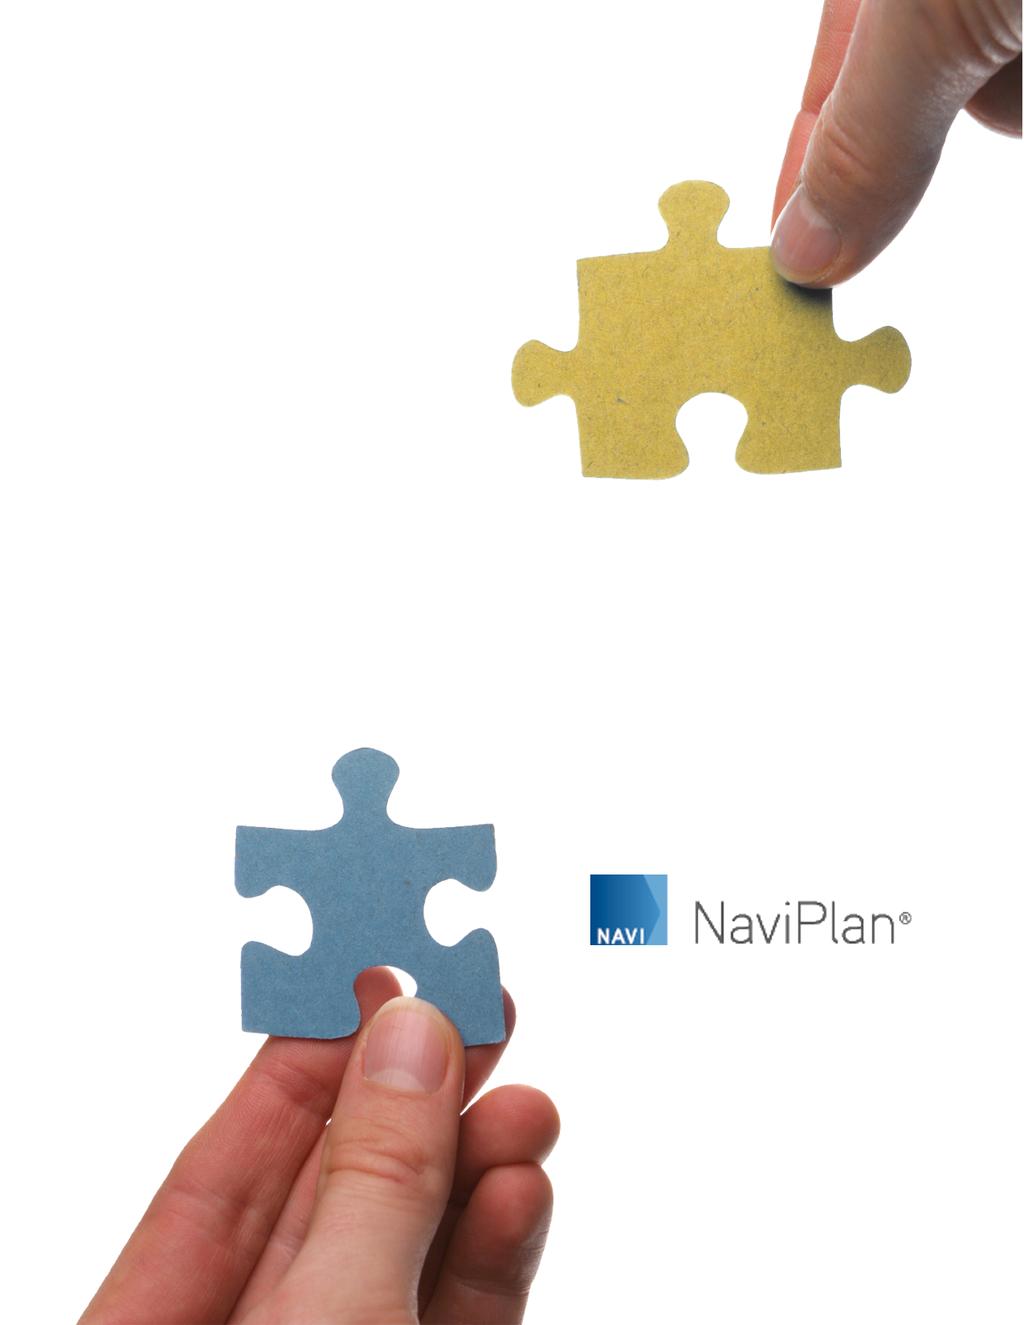 NAVIPLAN PREMIUM LEARNING GUIDE Analyze, compare,